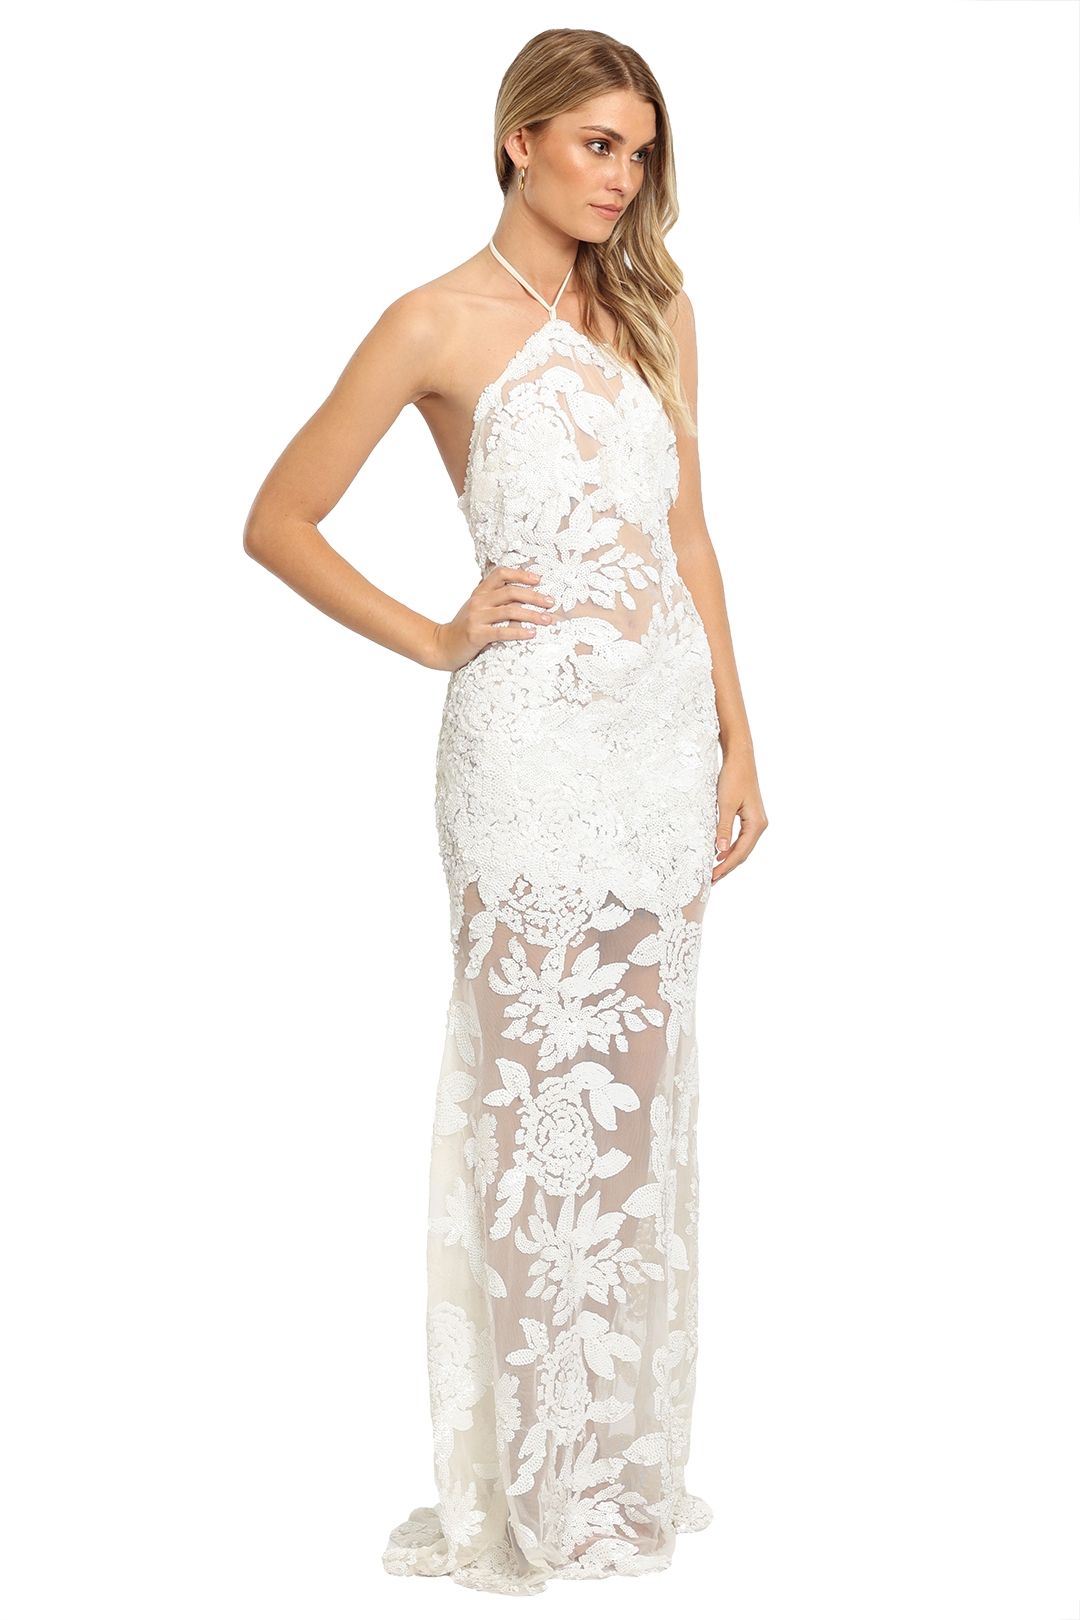 Ae'lkemi Floral Sequin Backless Dress white